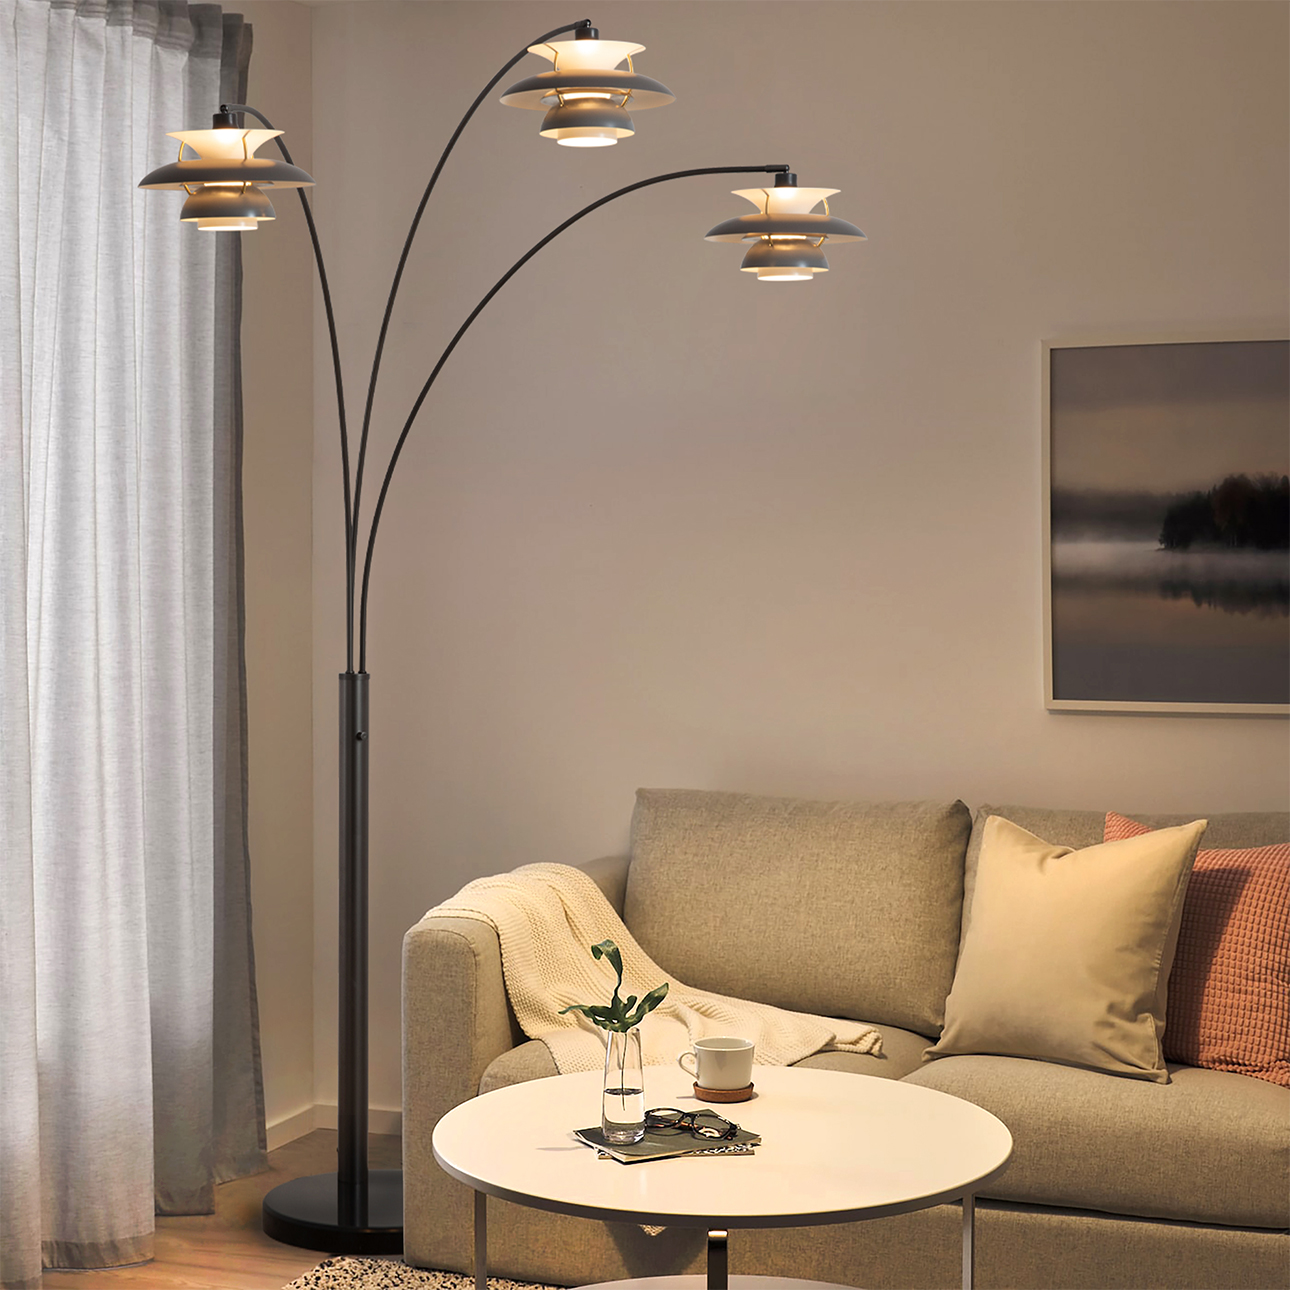 Palm Springs 84″ 3 Light Arc Lamp in Gunmetal and Graytone Shades with Dimmer Switch